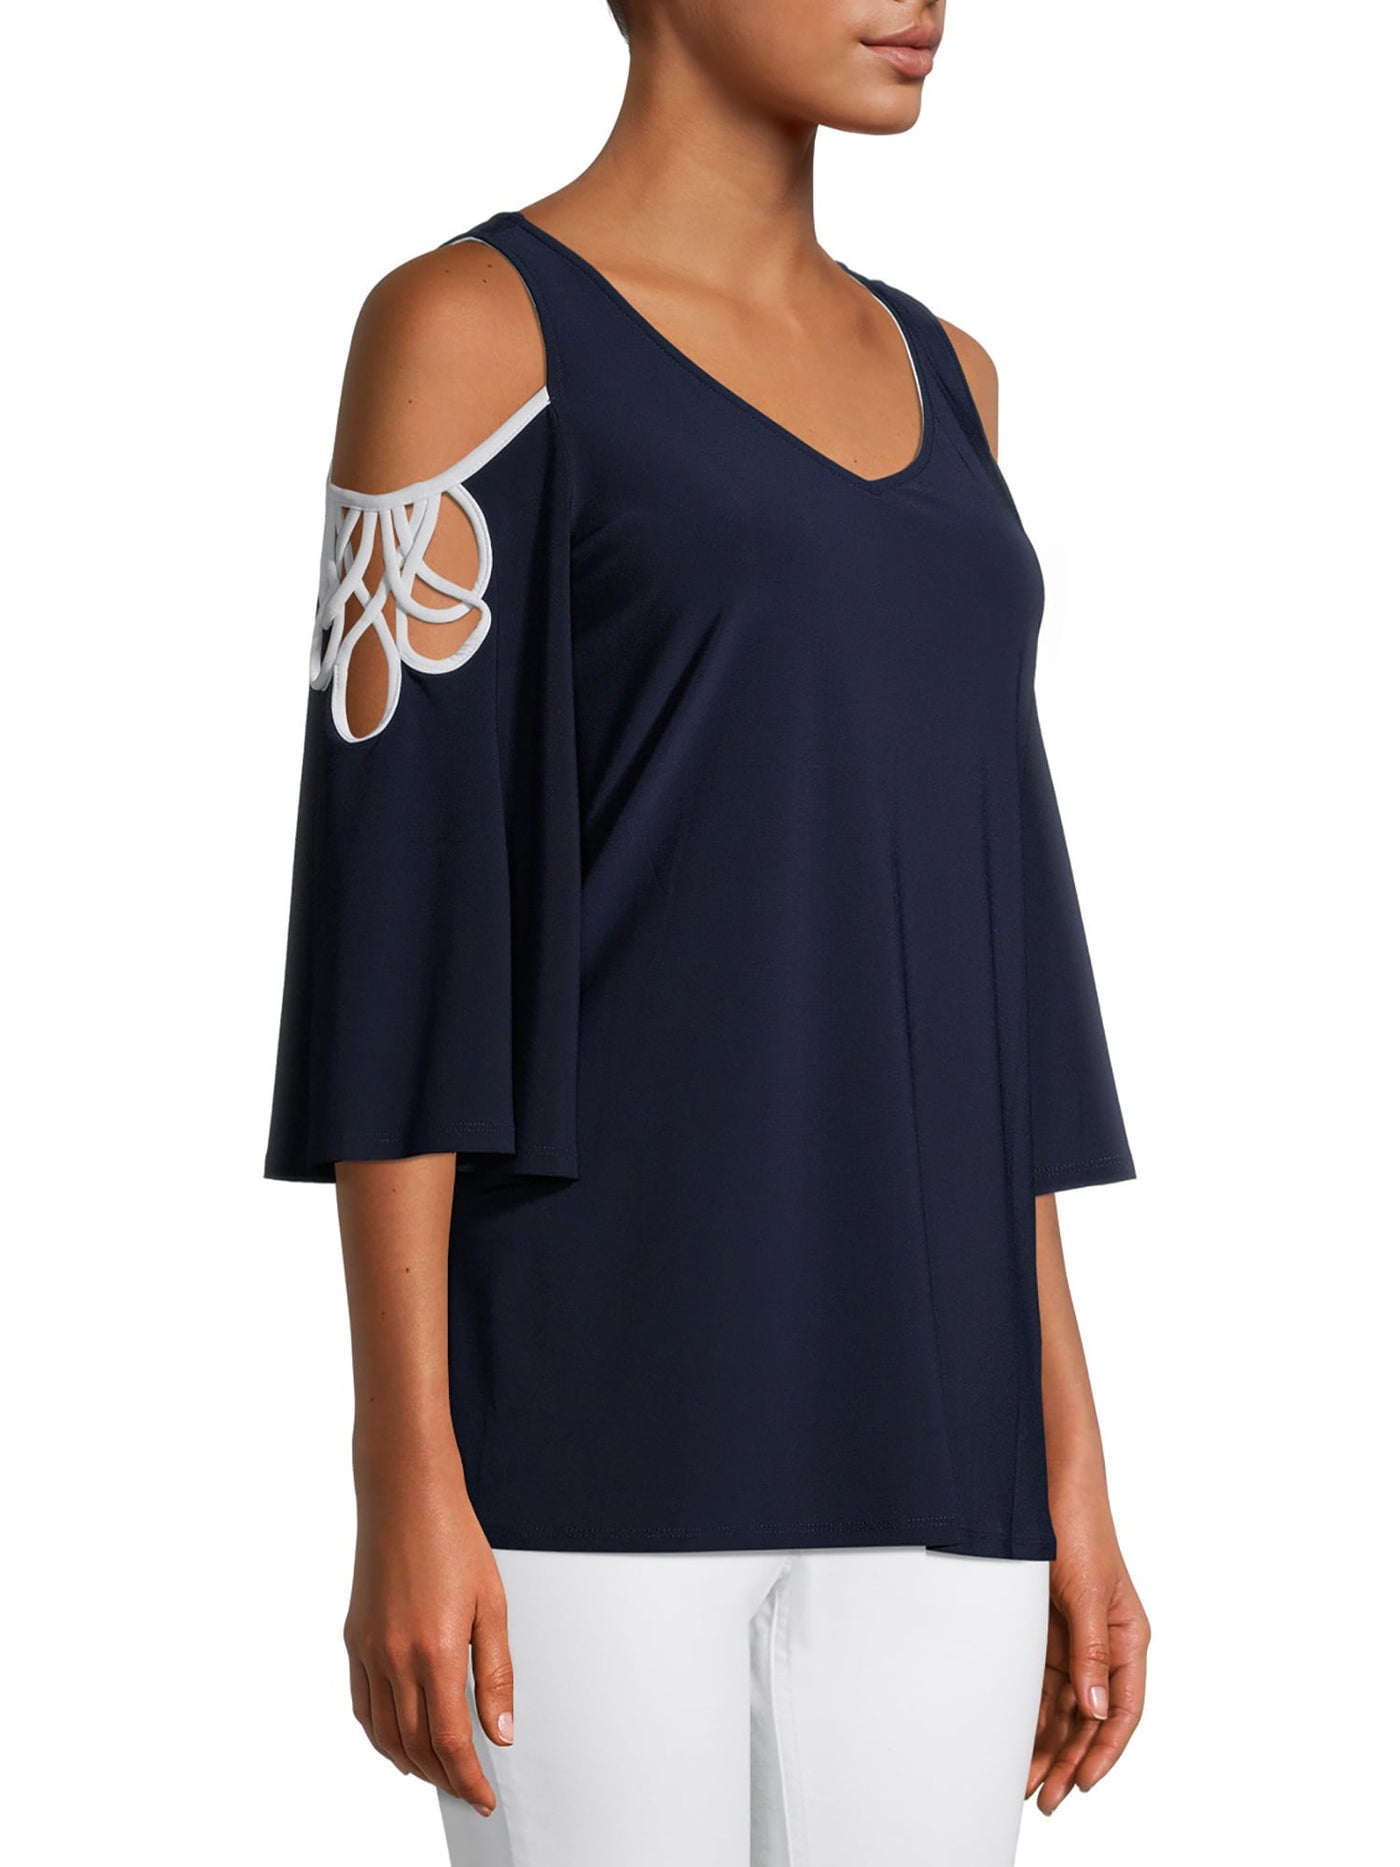 VINCE CAMUTO Womens Navy Cold Shoulder Cut Out 3/4 Sleeve V Neck Top L